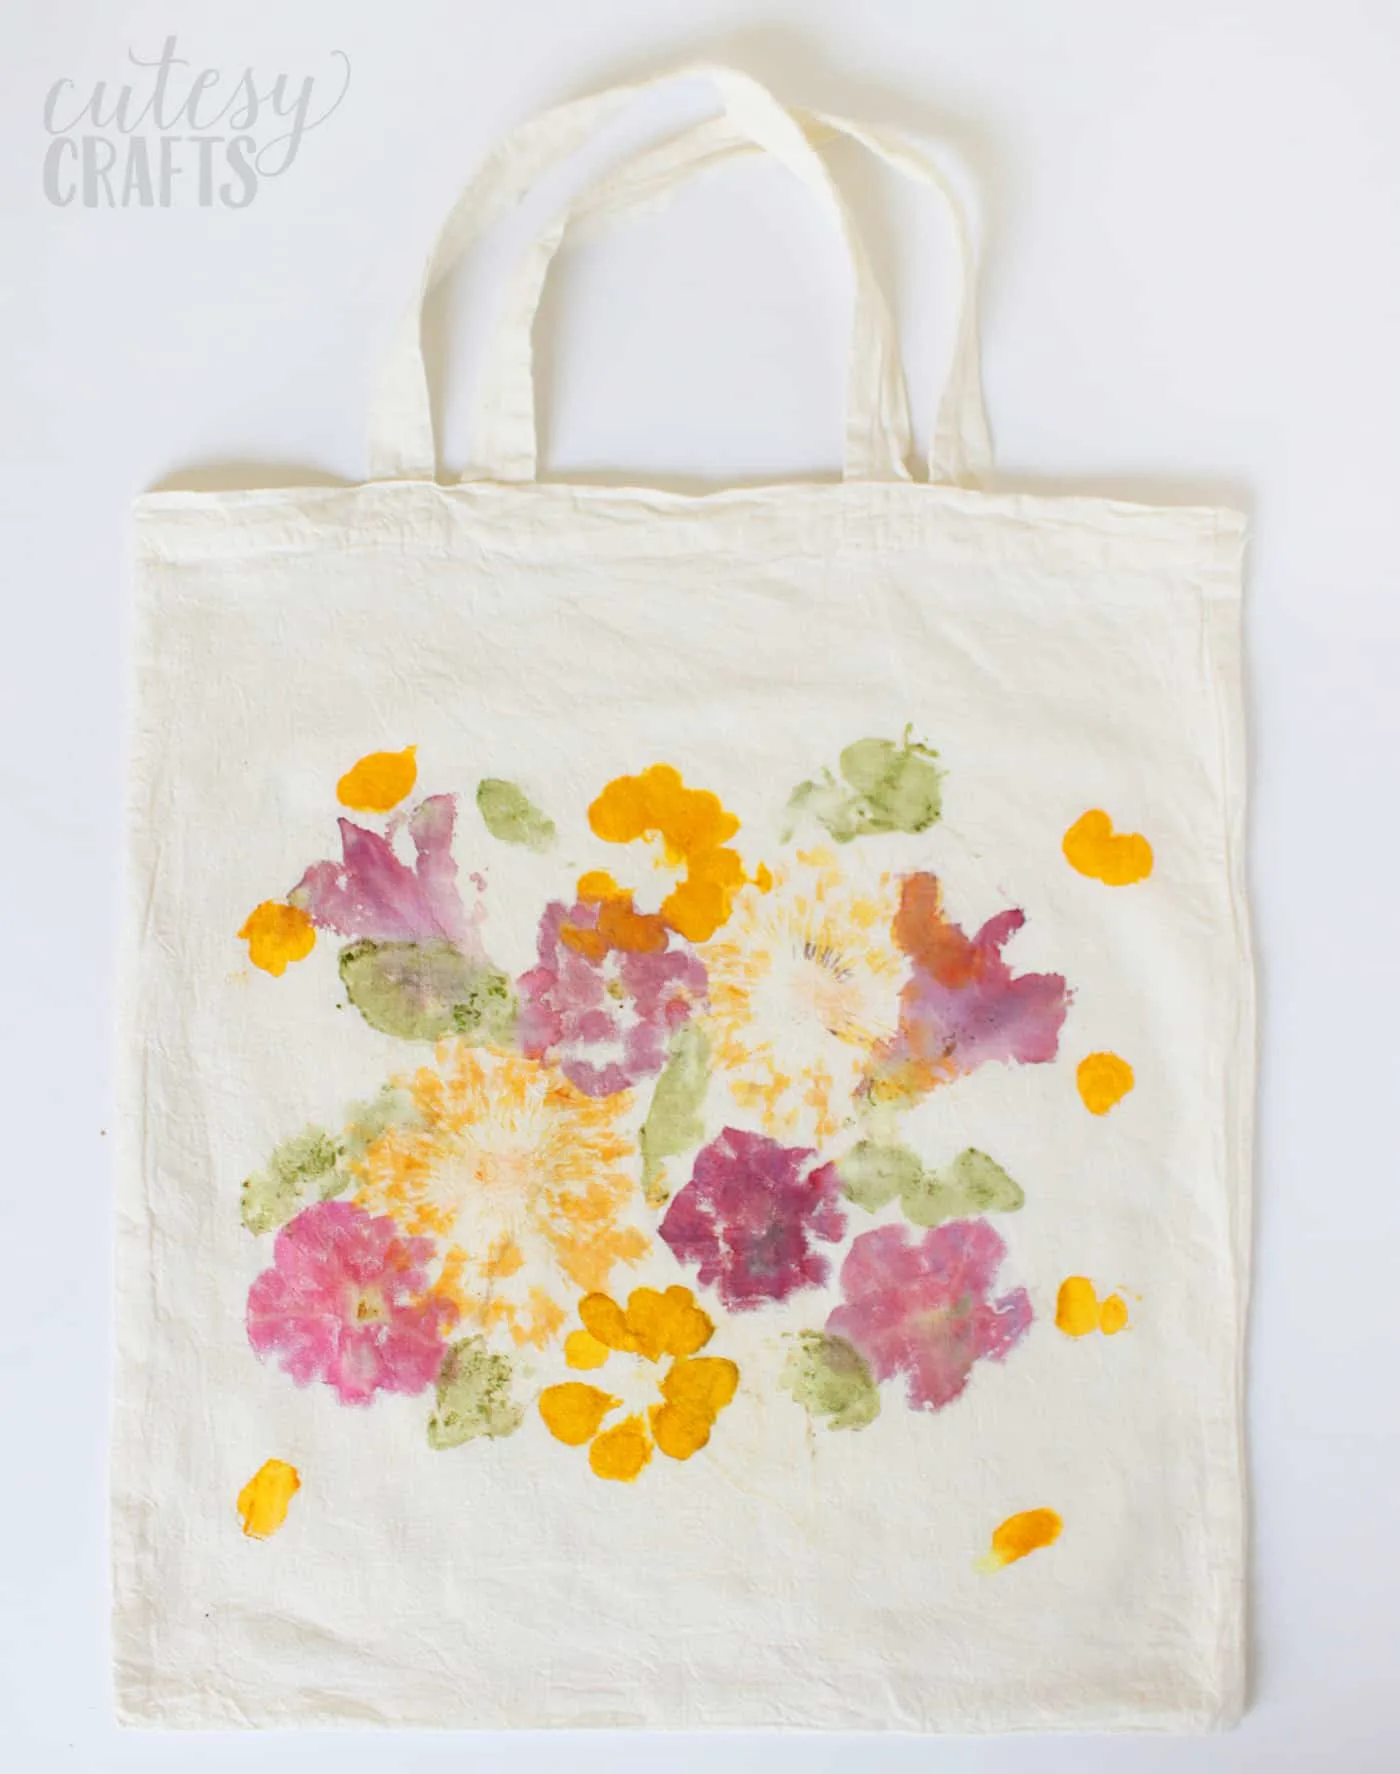 My kids would have so much fun making this hammered flower tote bag for Mother's Day. I'm adding this to my list! (project from Cutesy Crafts for DIY Candy).